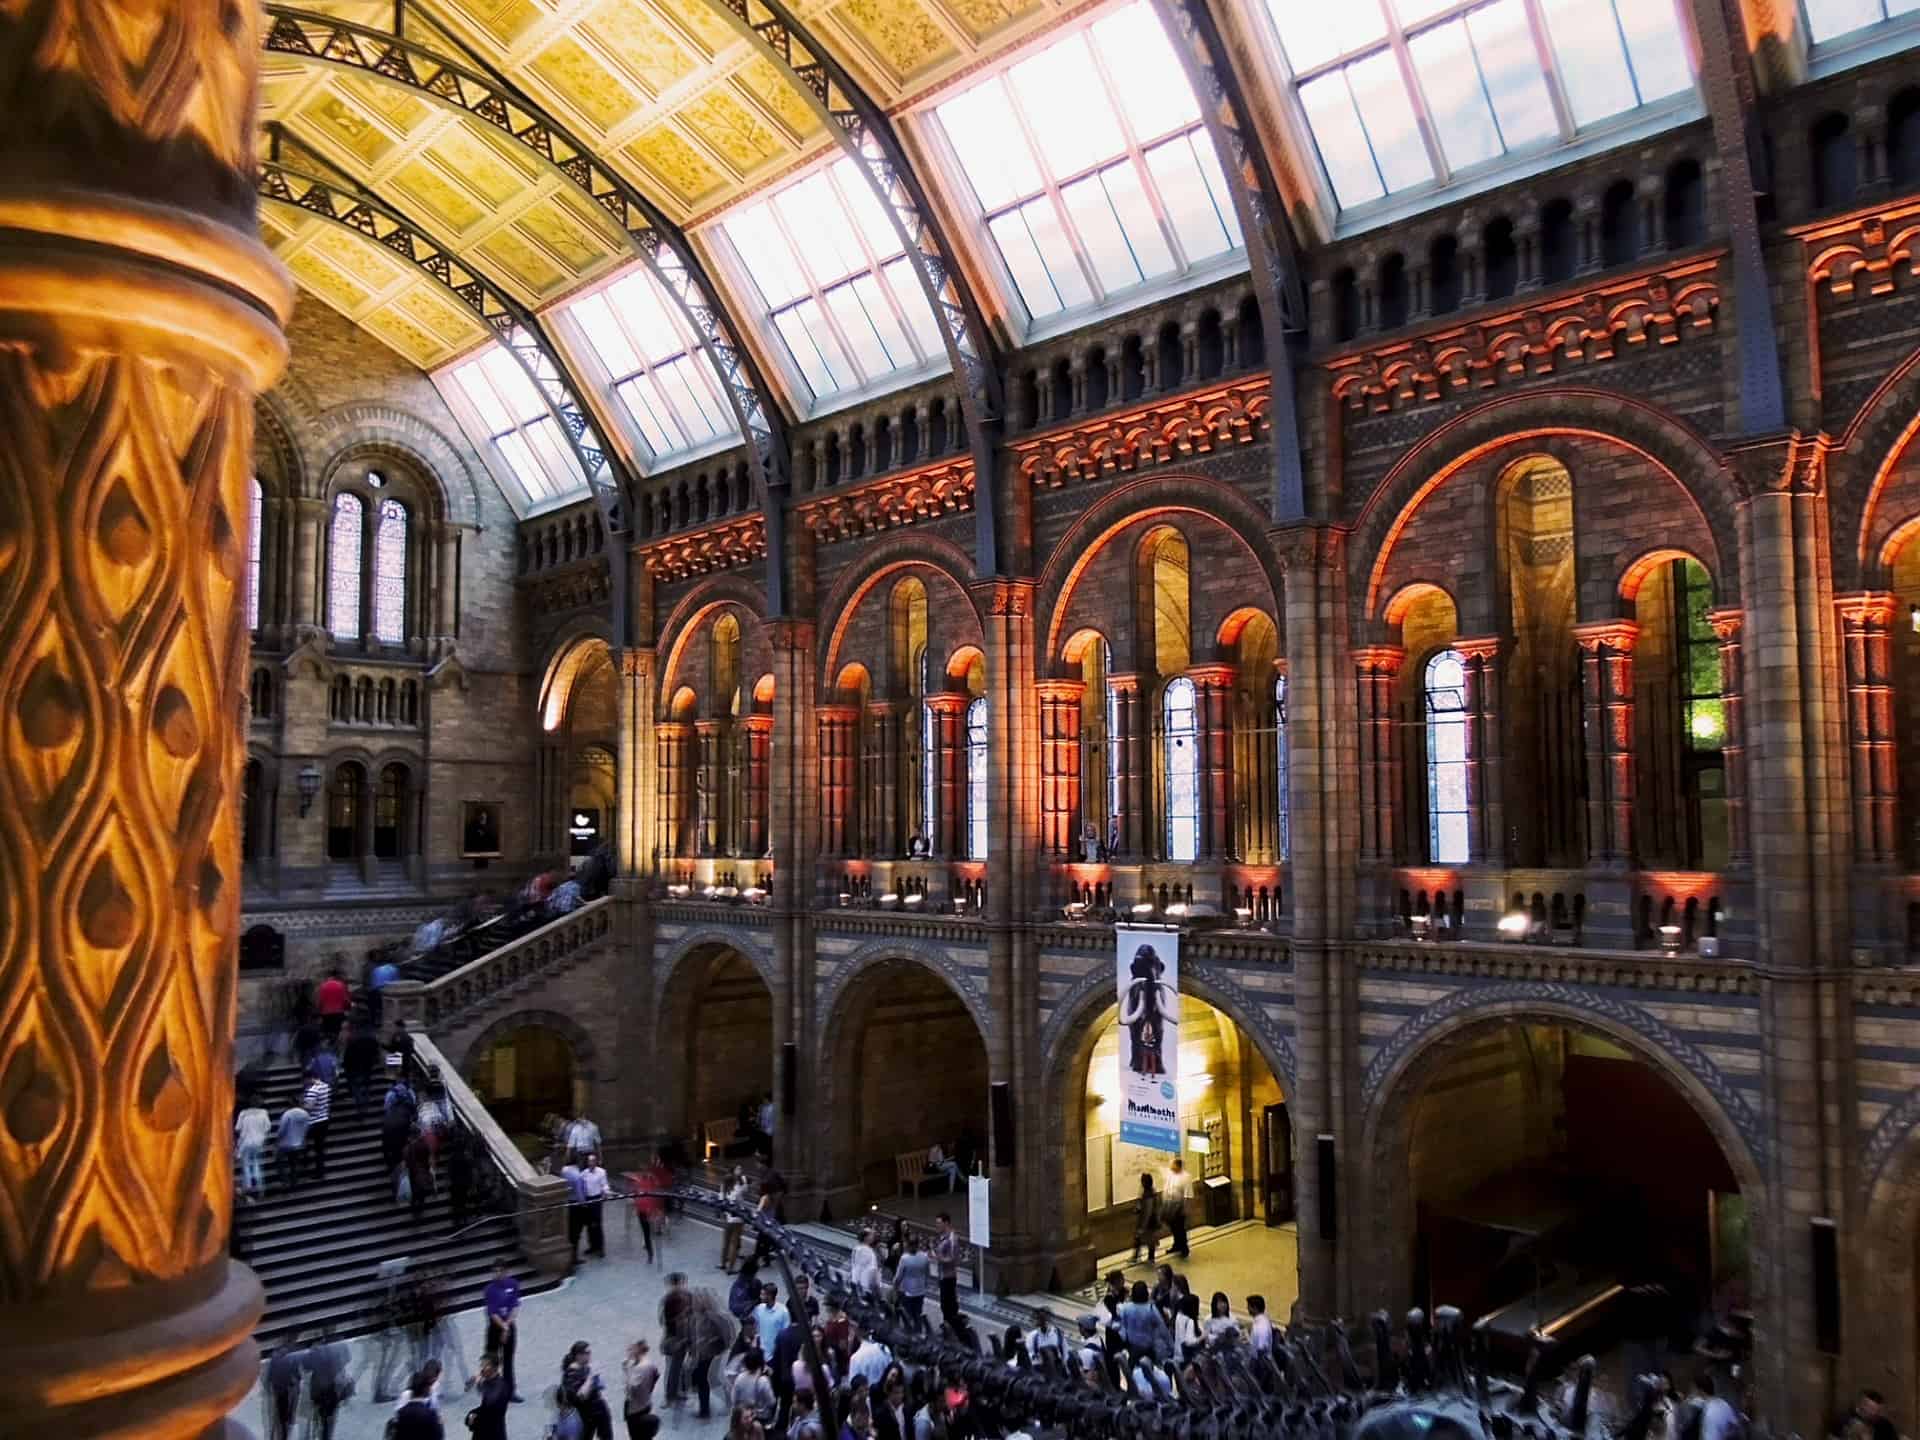 Image of the London Natural History Museum